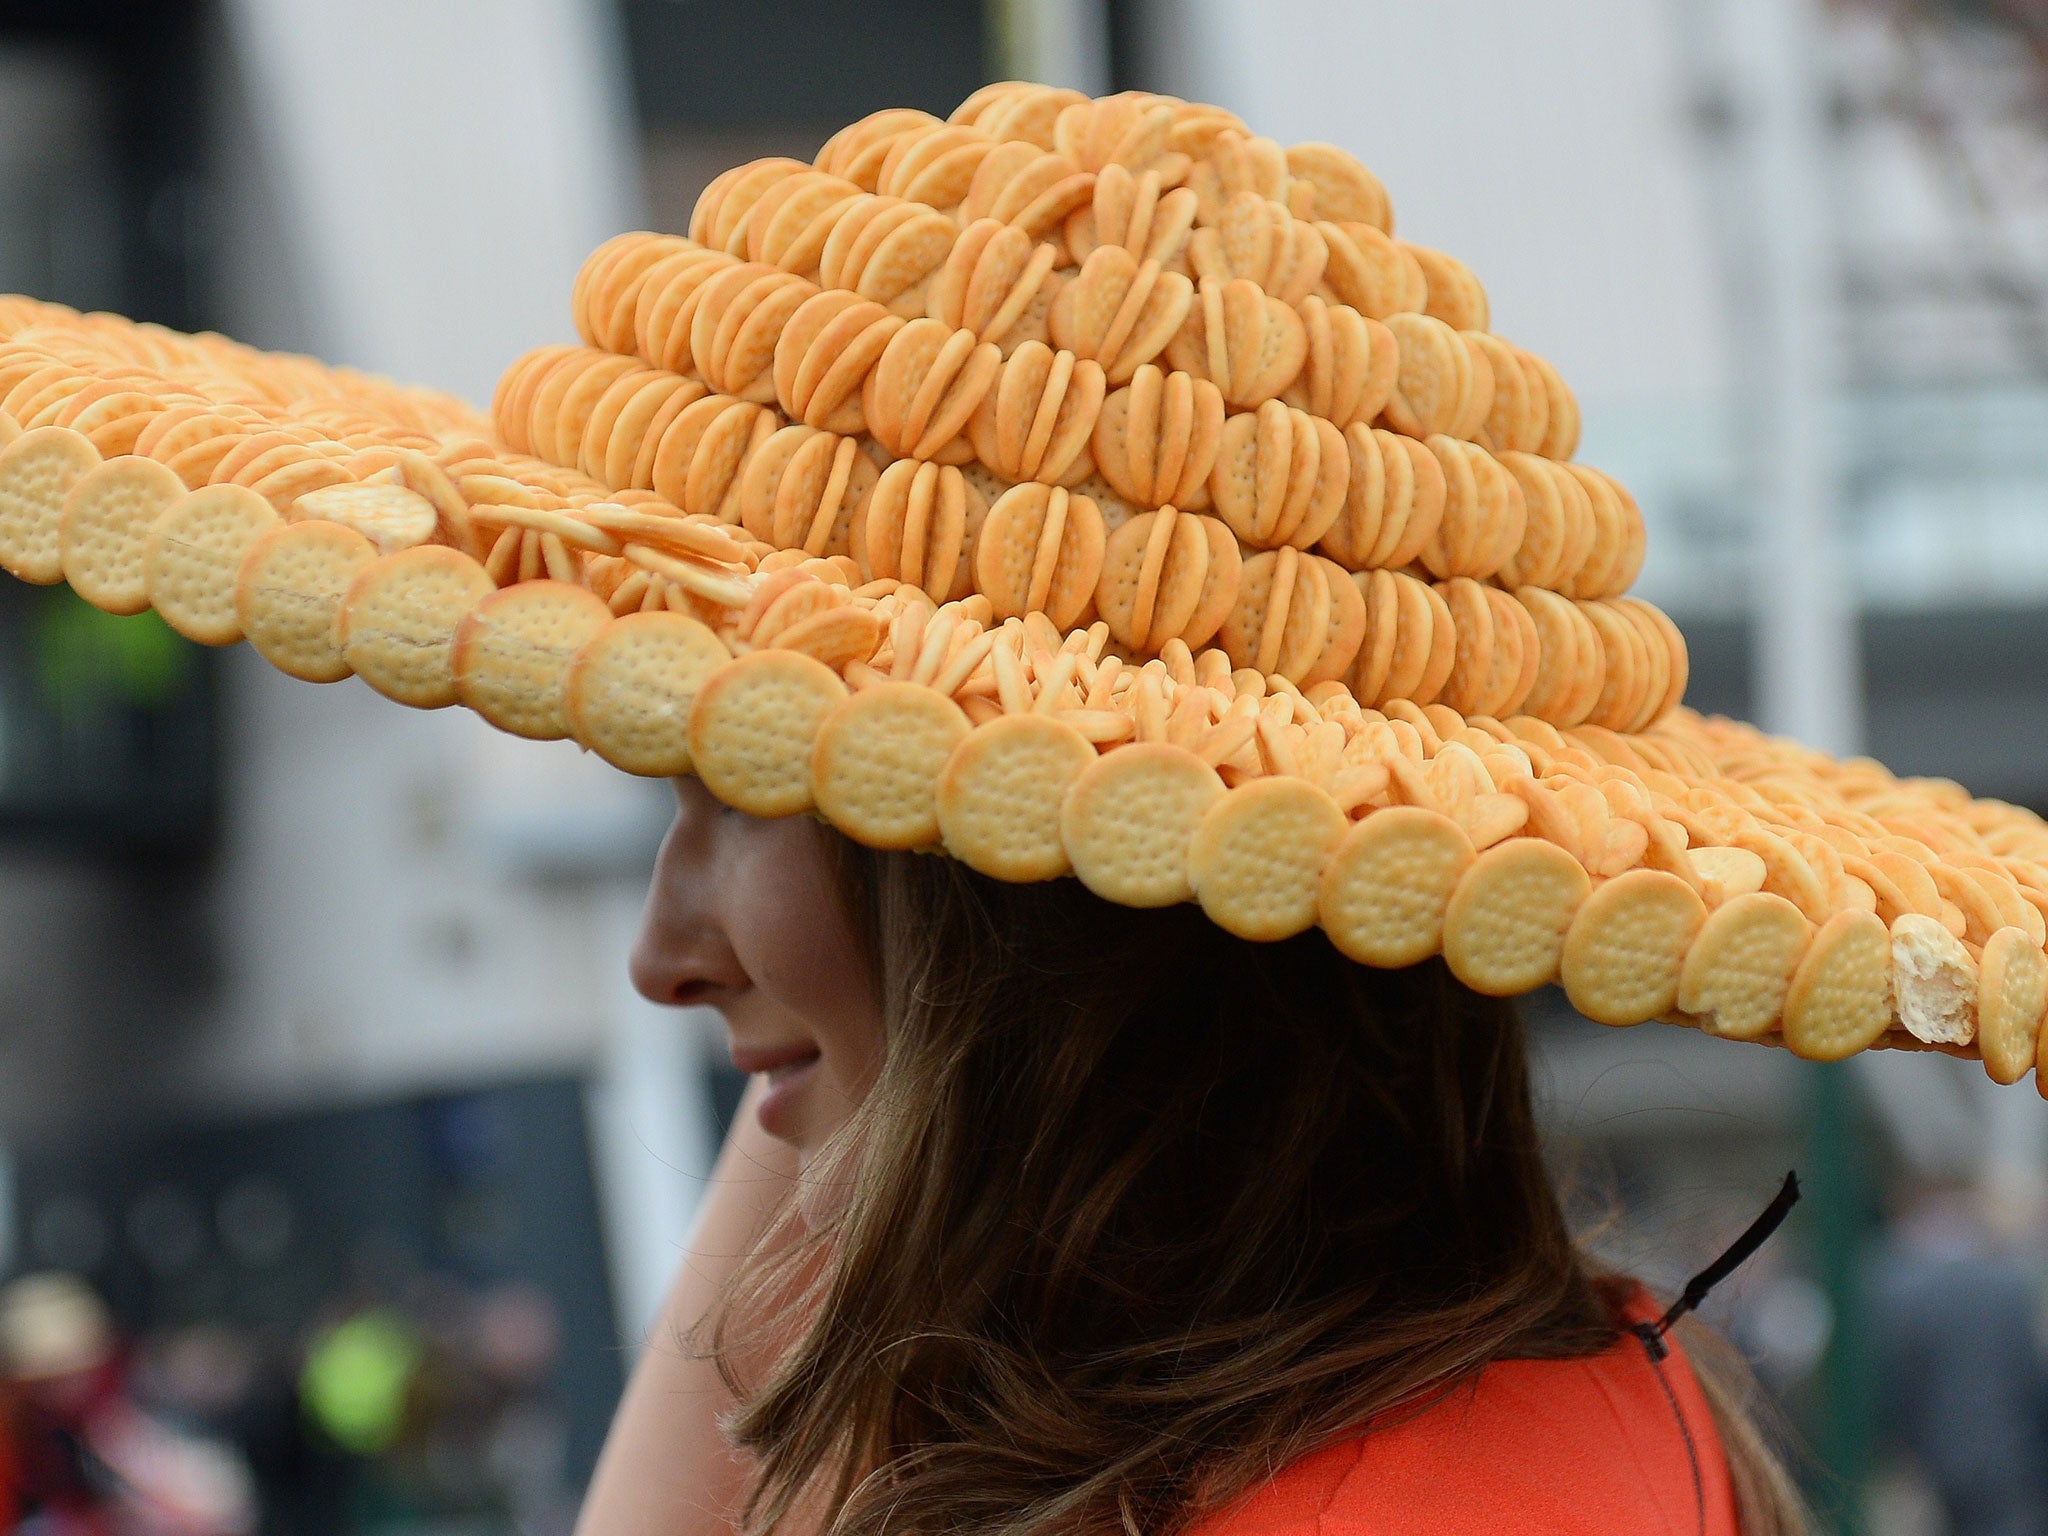 This hat really takes the biscuit